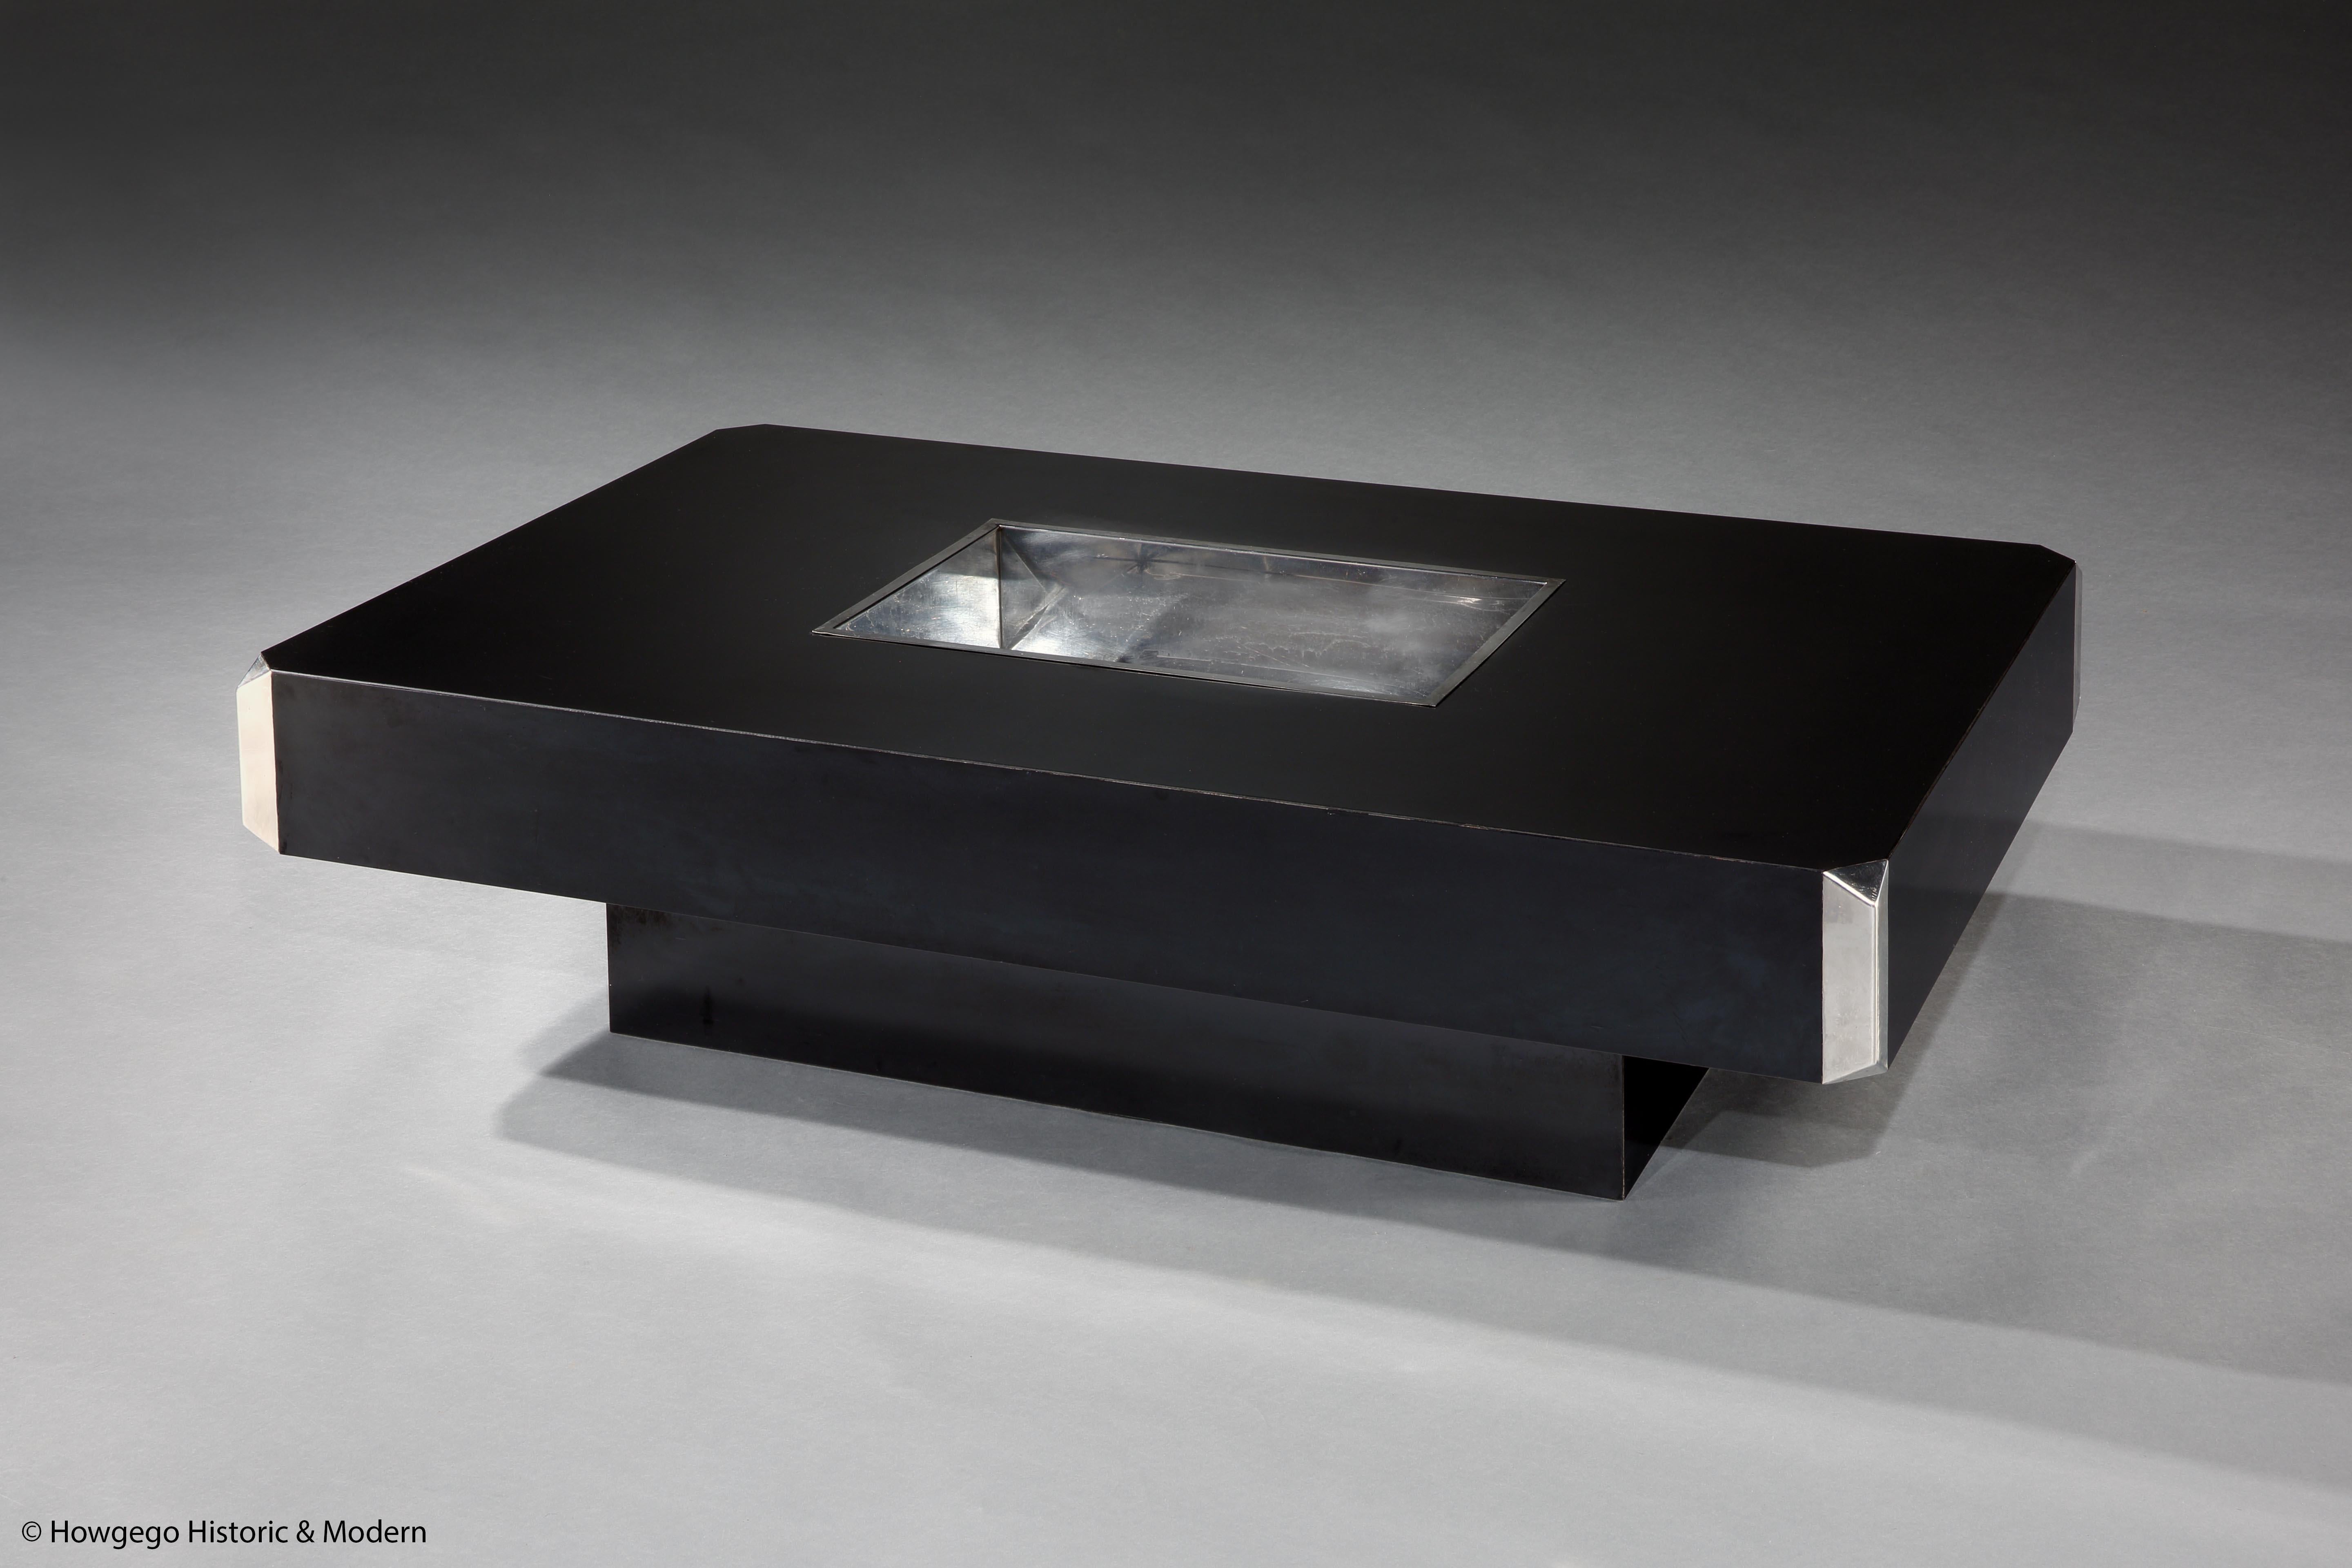 “It was about creating something new for a traditional setting.” Willy Rizzo, 'ALVEO' black lacquered and chromed coffee table, for Cidue, Italy, 1972-1973
- The recessed base creates the impression that the table is floating and lightens the